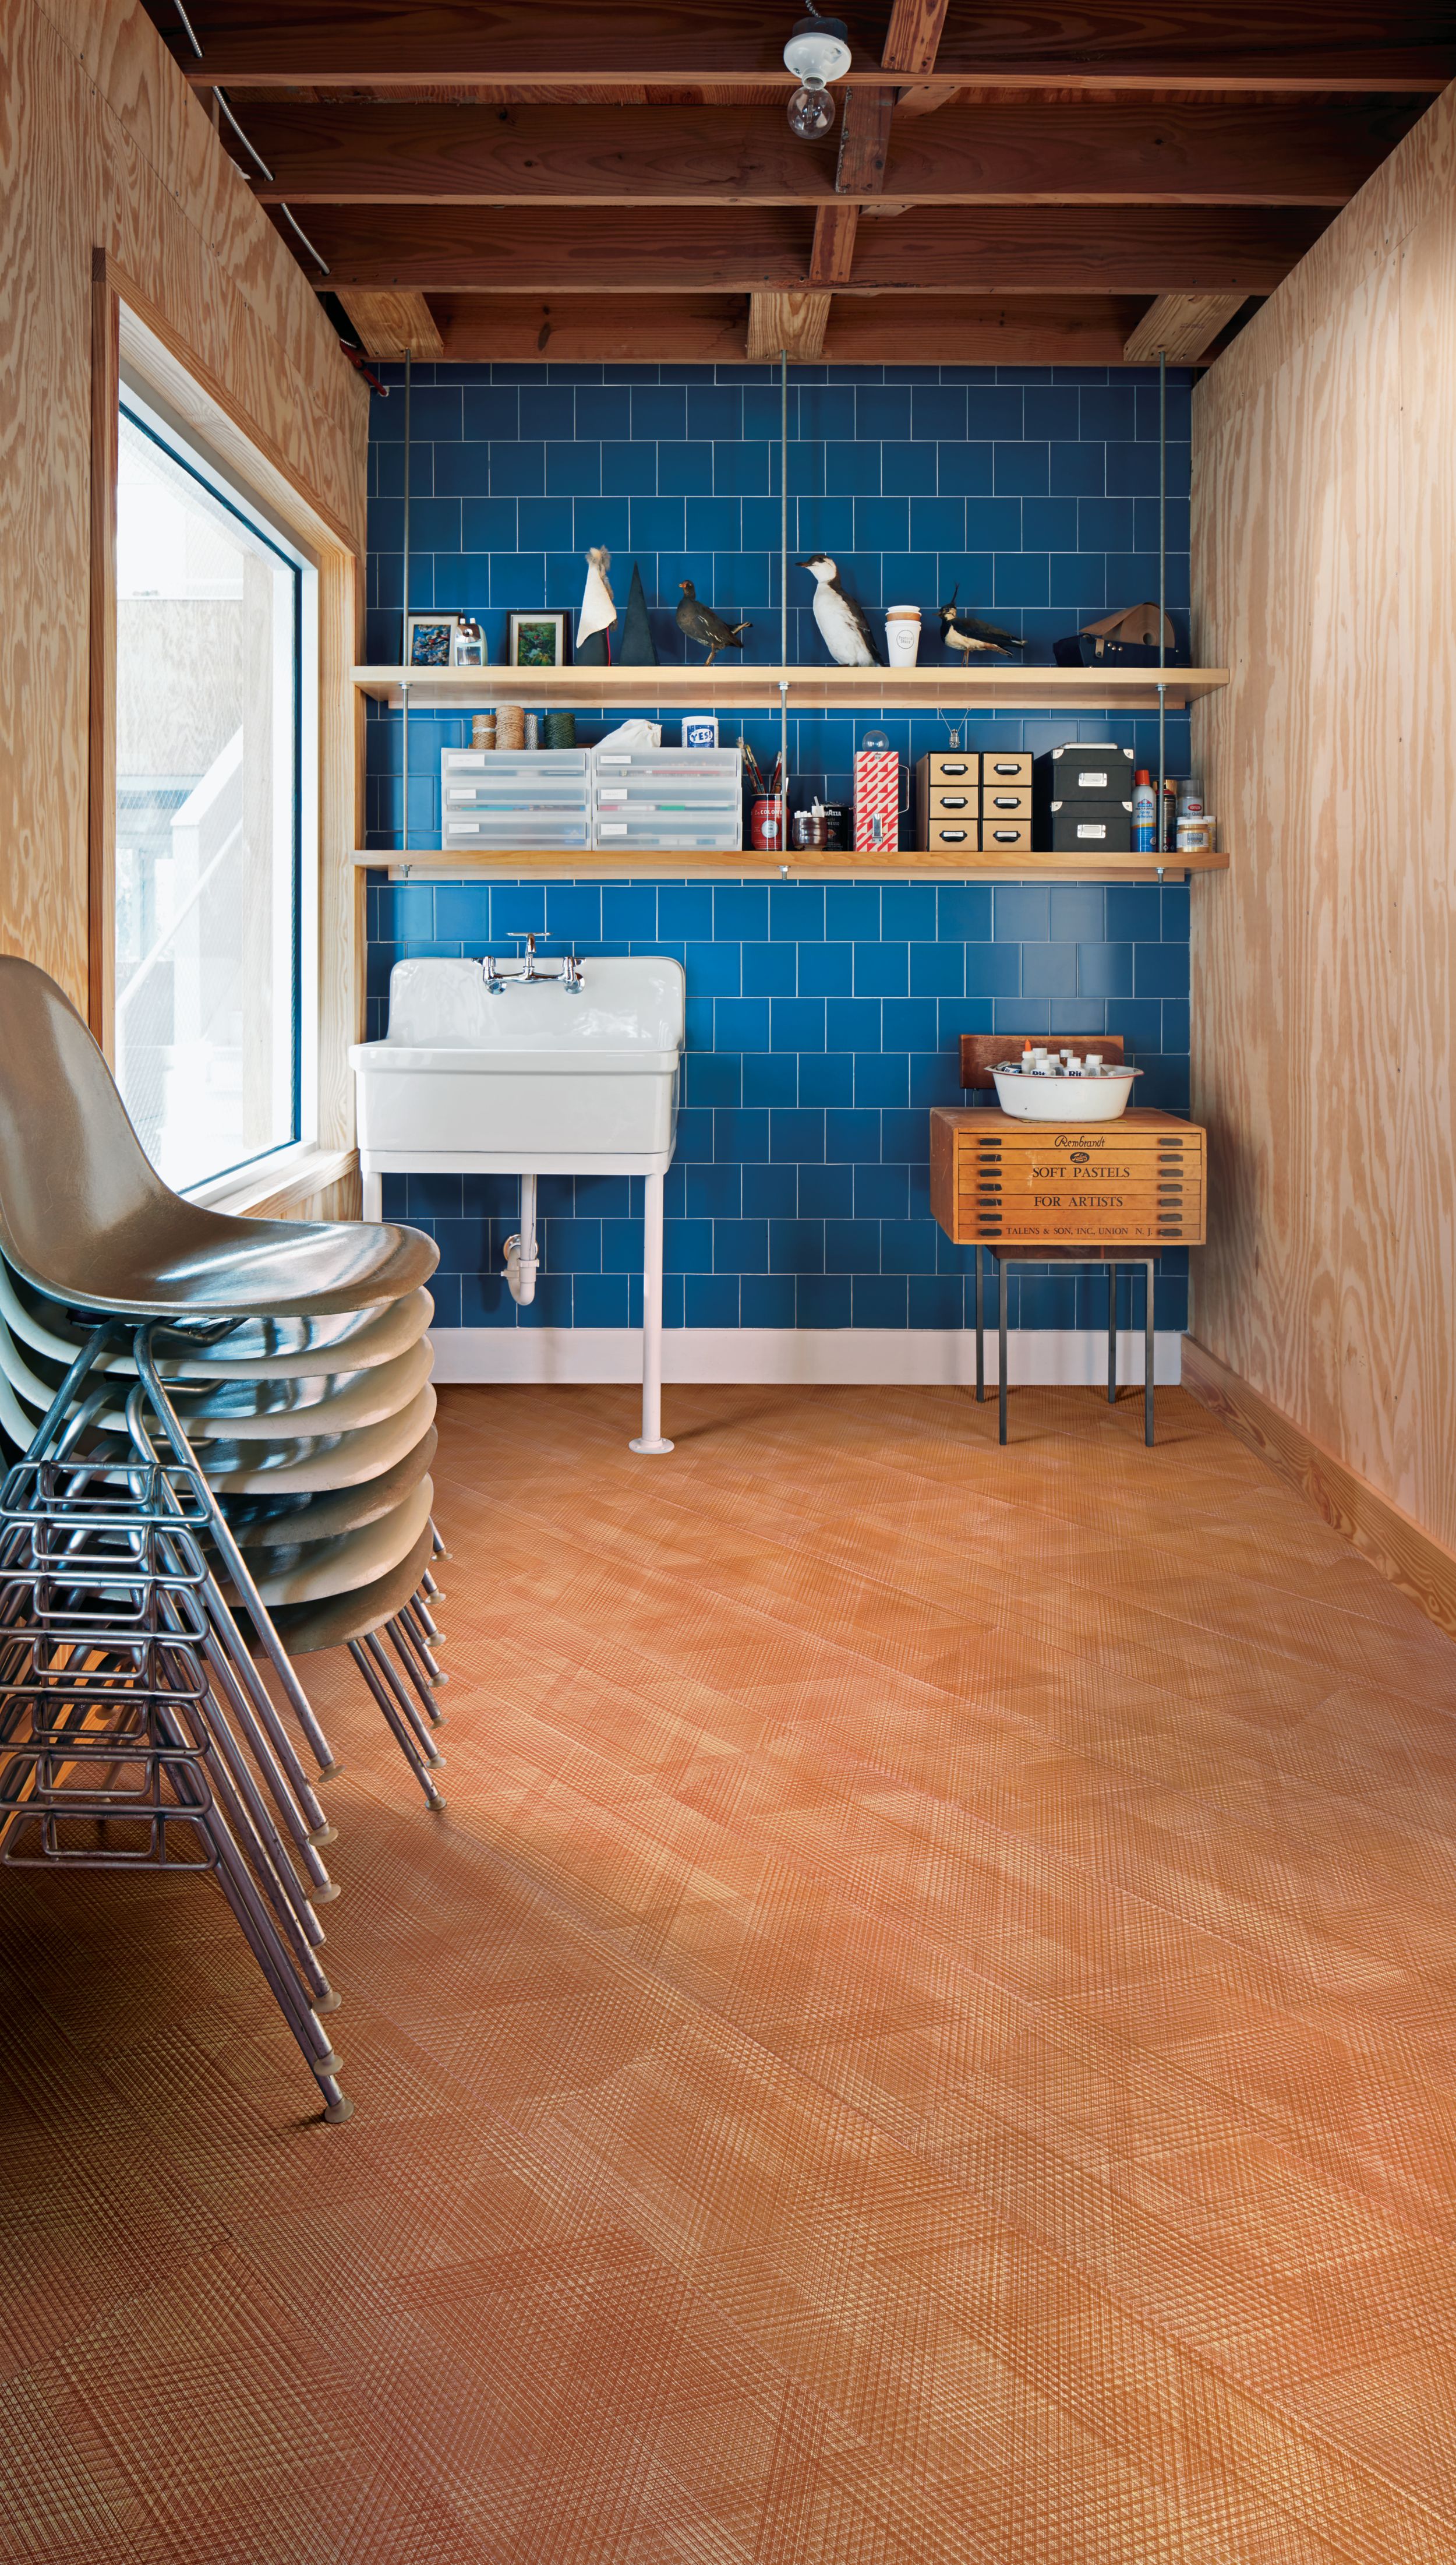 Interface Drawn Lines LVT in storage area with shelving and sink Bildnummer 4